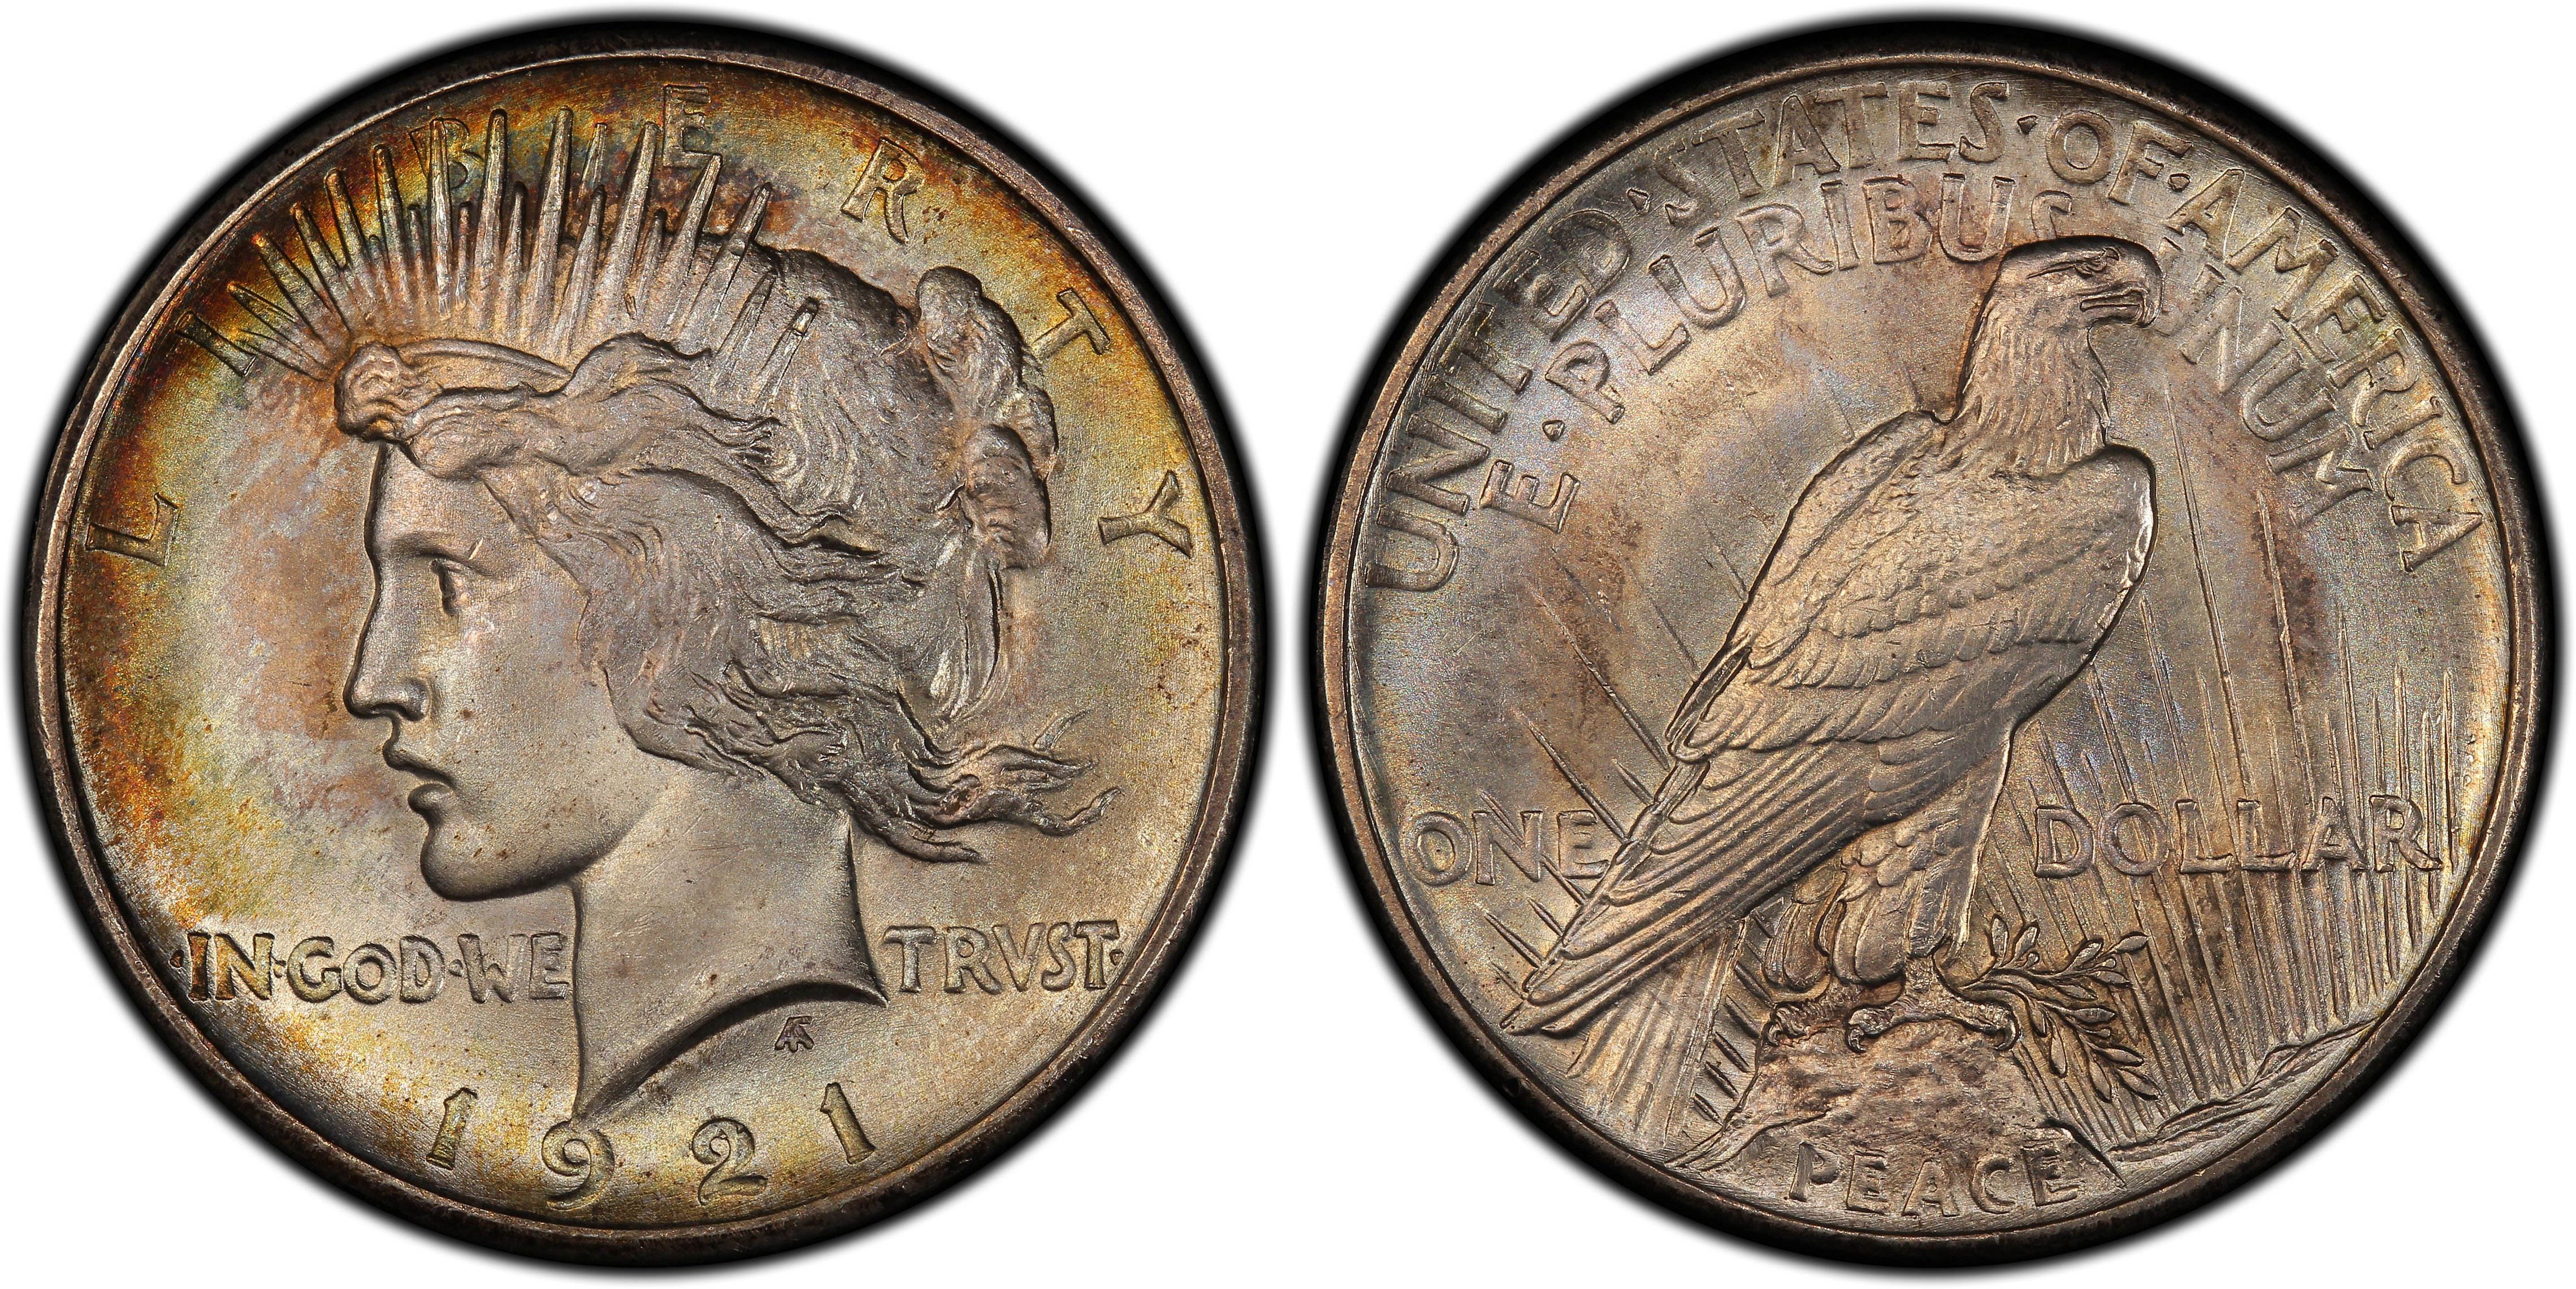 1921 1 High Relief Peace Regular Strike Peace Dollar Pcgs Coinfacts,Mascarpone Cheese Giant